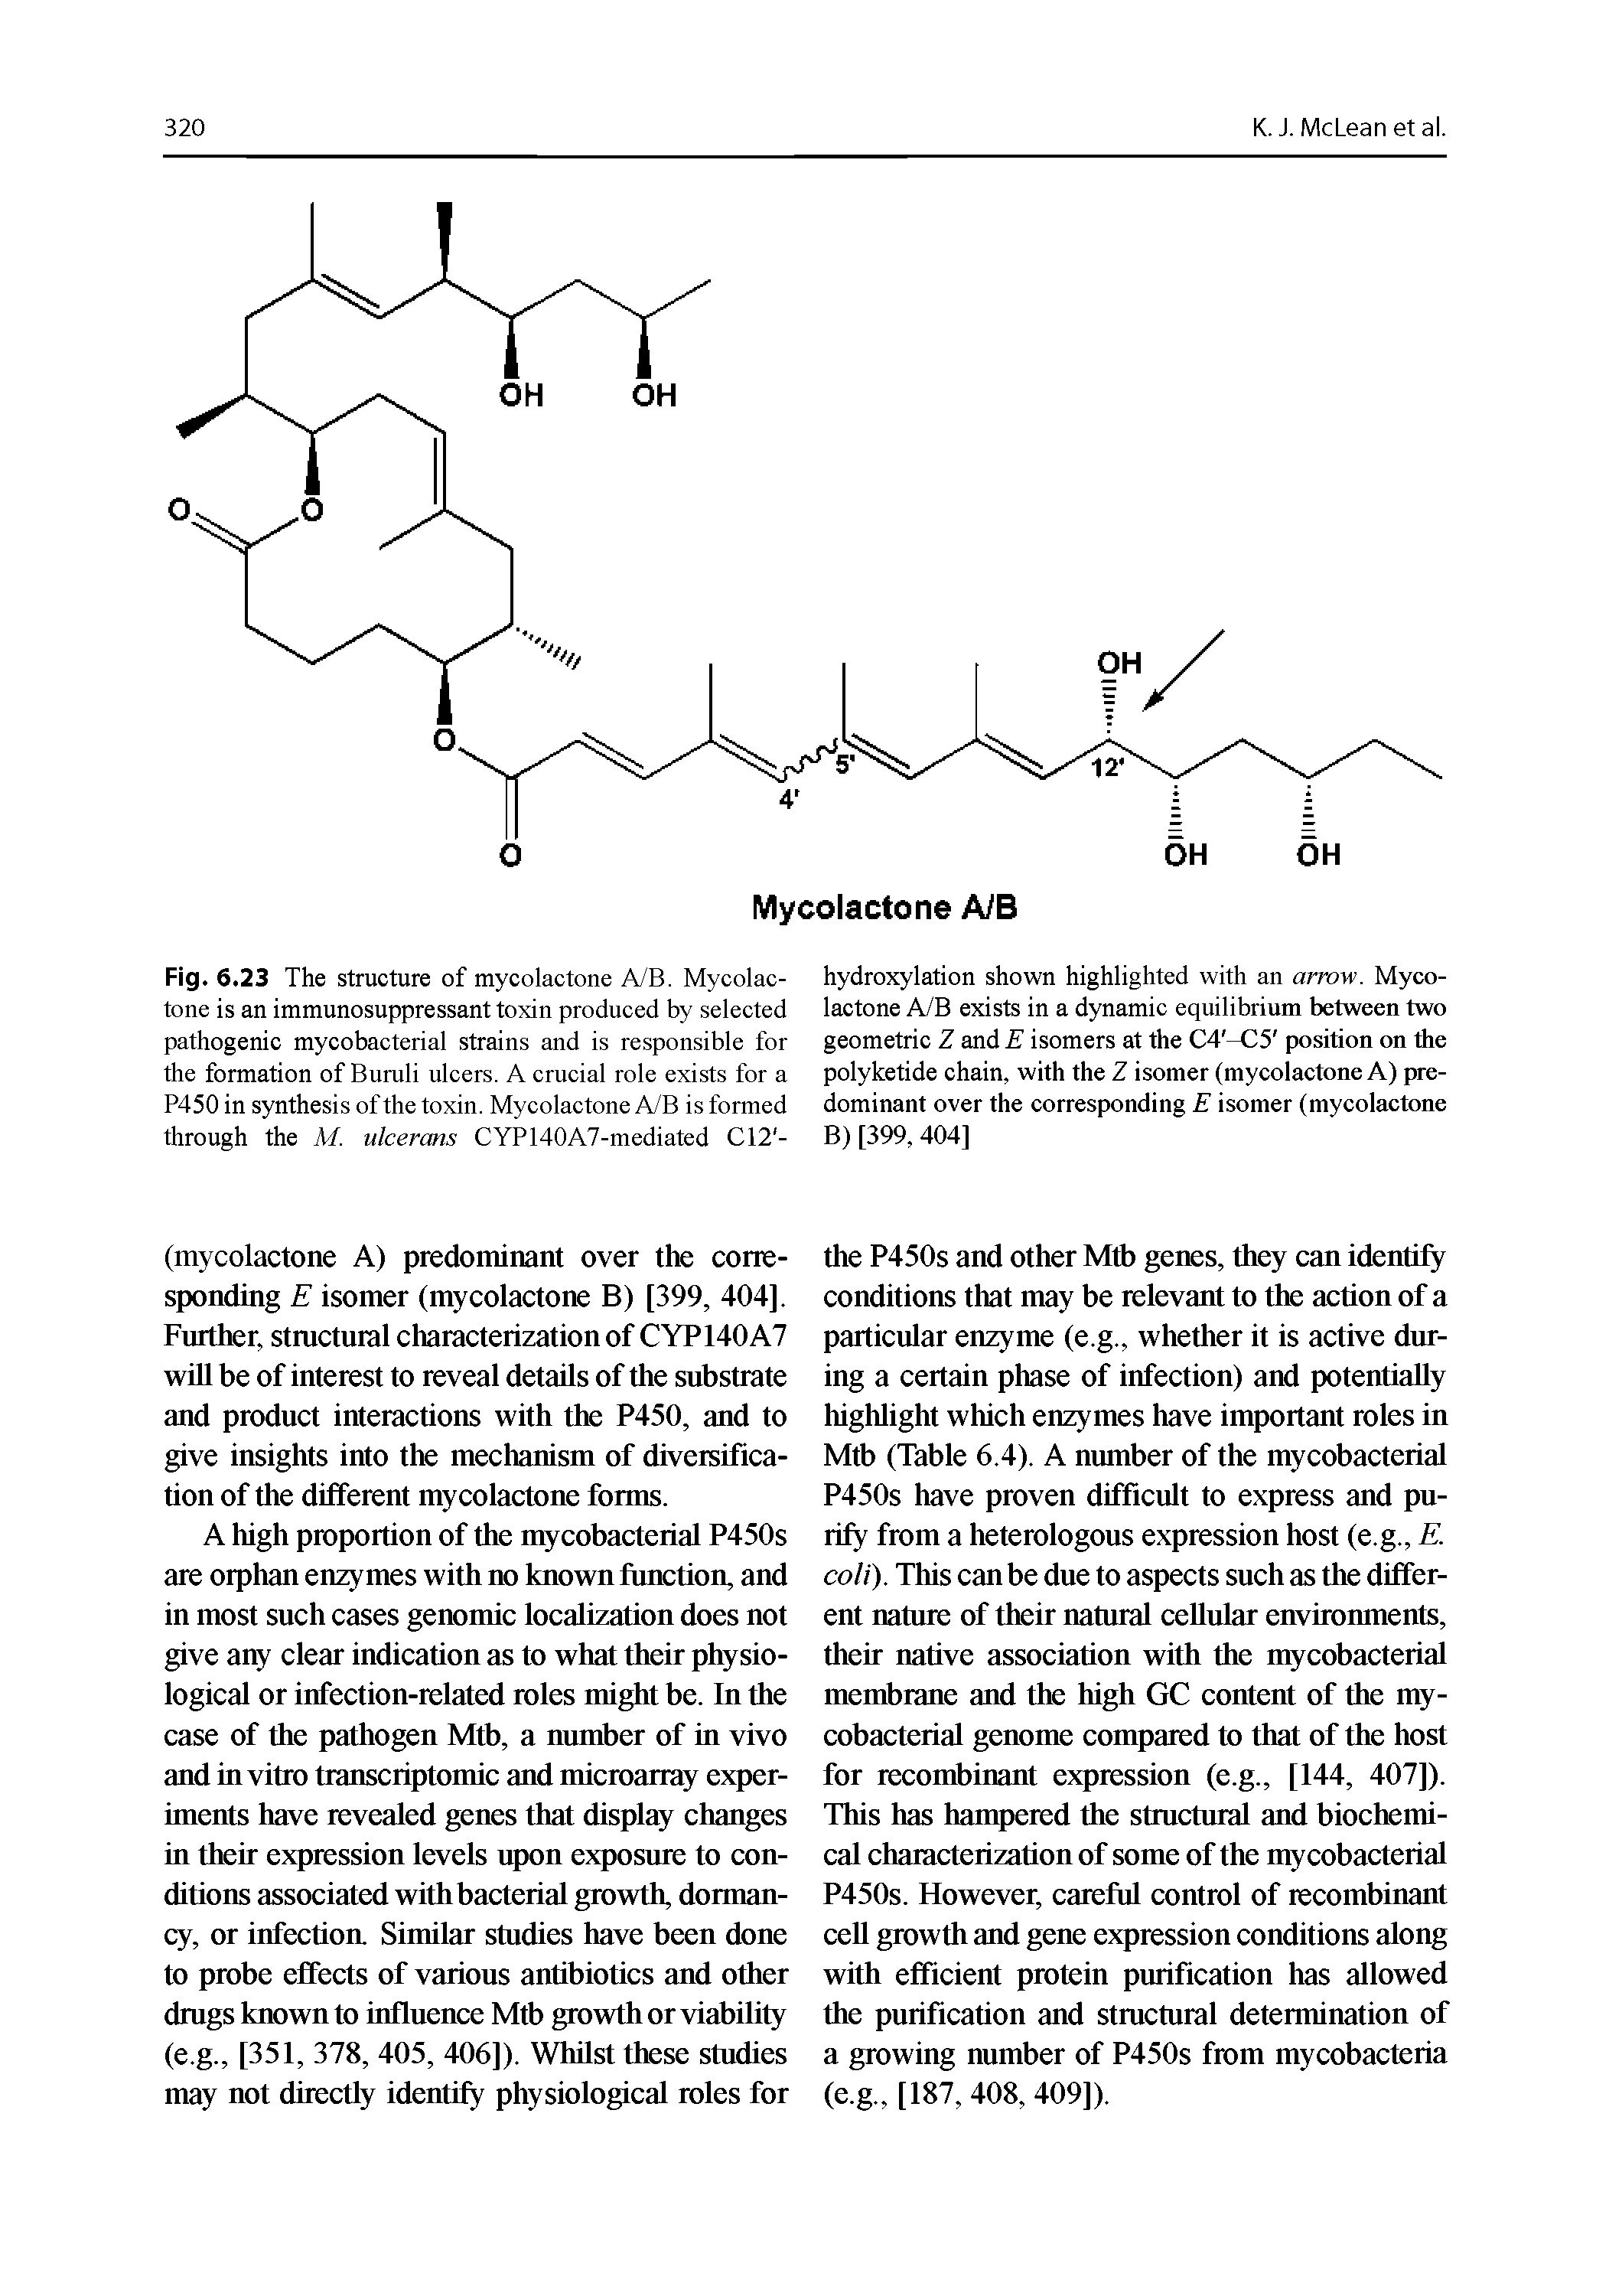 Fig. 6.23 The structure of mycolactone A/B. Mycolactone is an immunosuppressant toxin produced by selected pathogenic mycobacterial strains and is responsible for the formation of Buruli ulcers. A crucial role exists for a P450 in synthesis of the toxin. Mycolactone A/B is formed through the M. ulcerans CYP140A7-mediated C12 -...